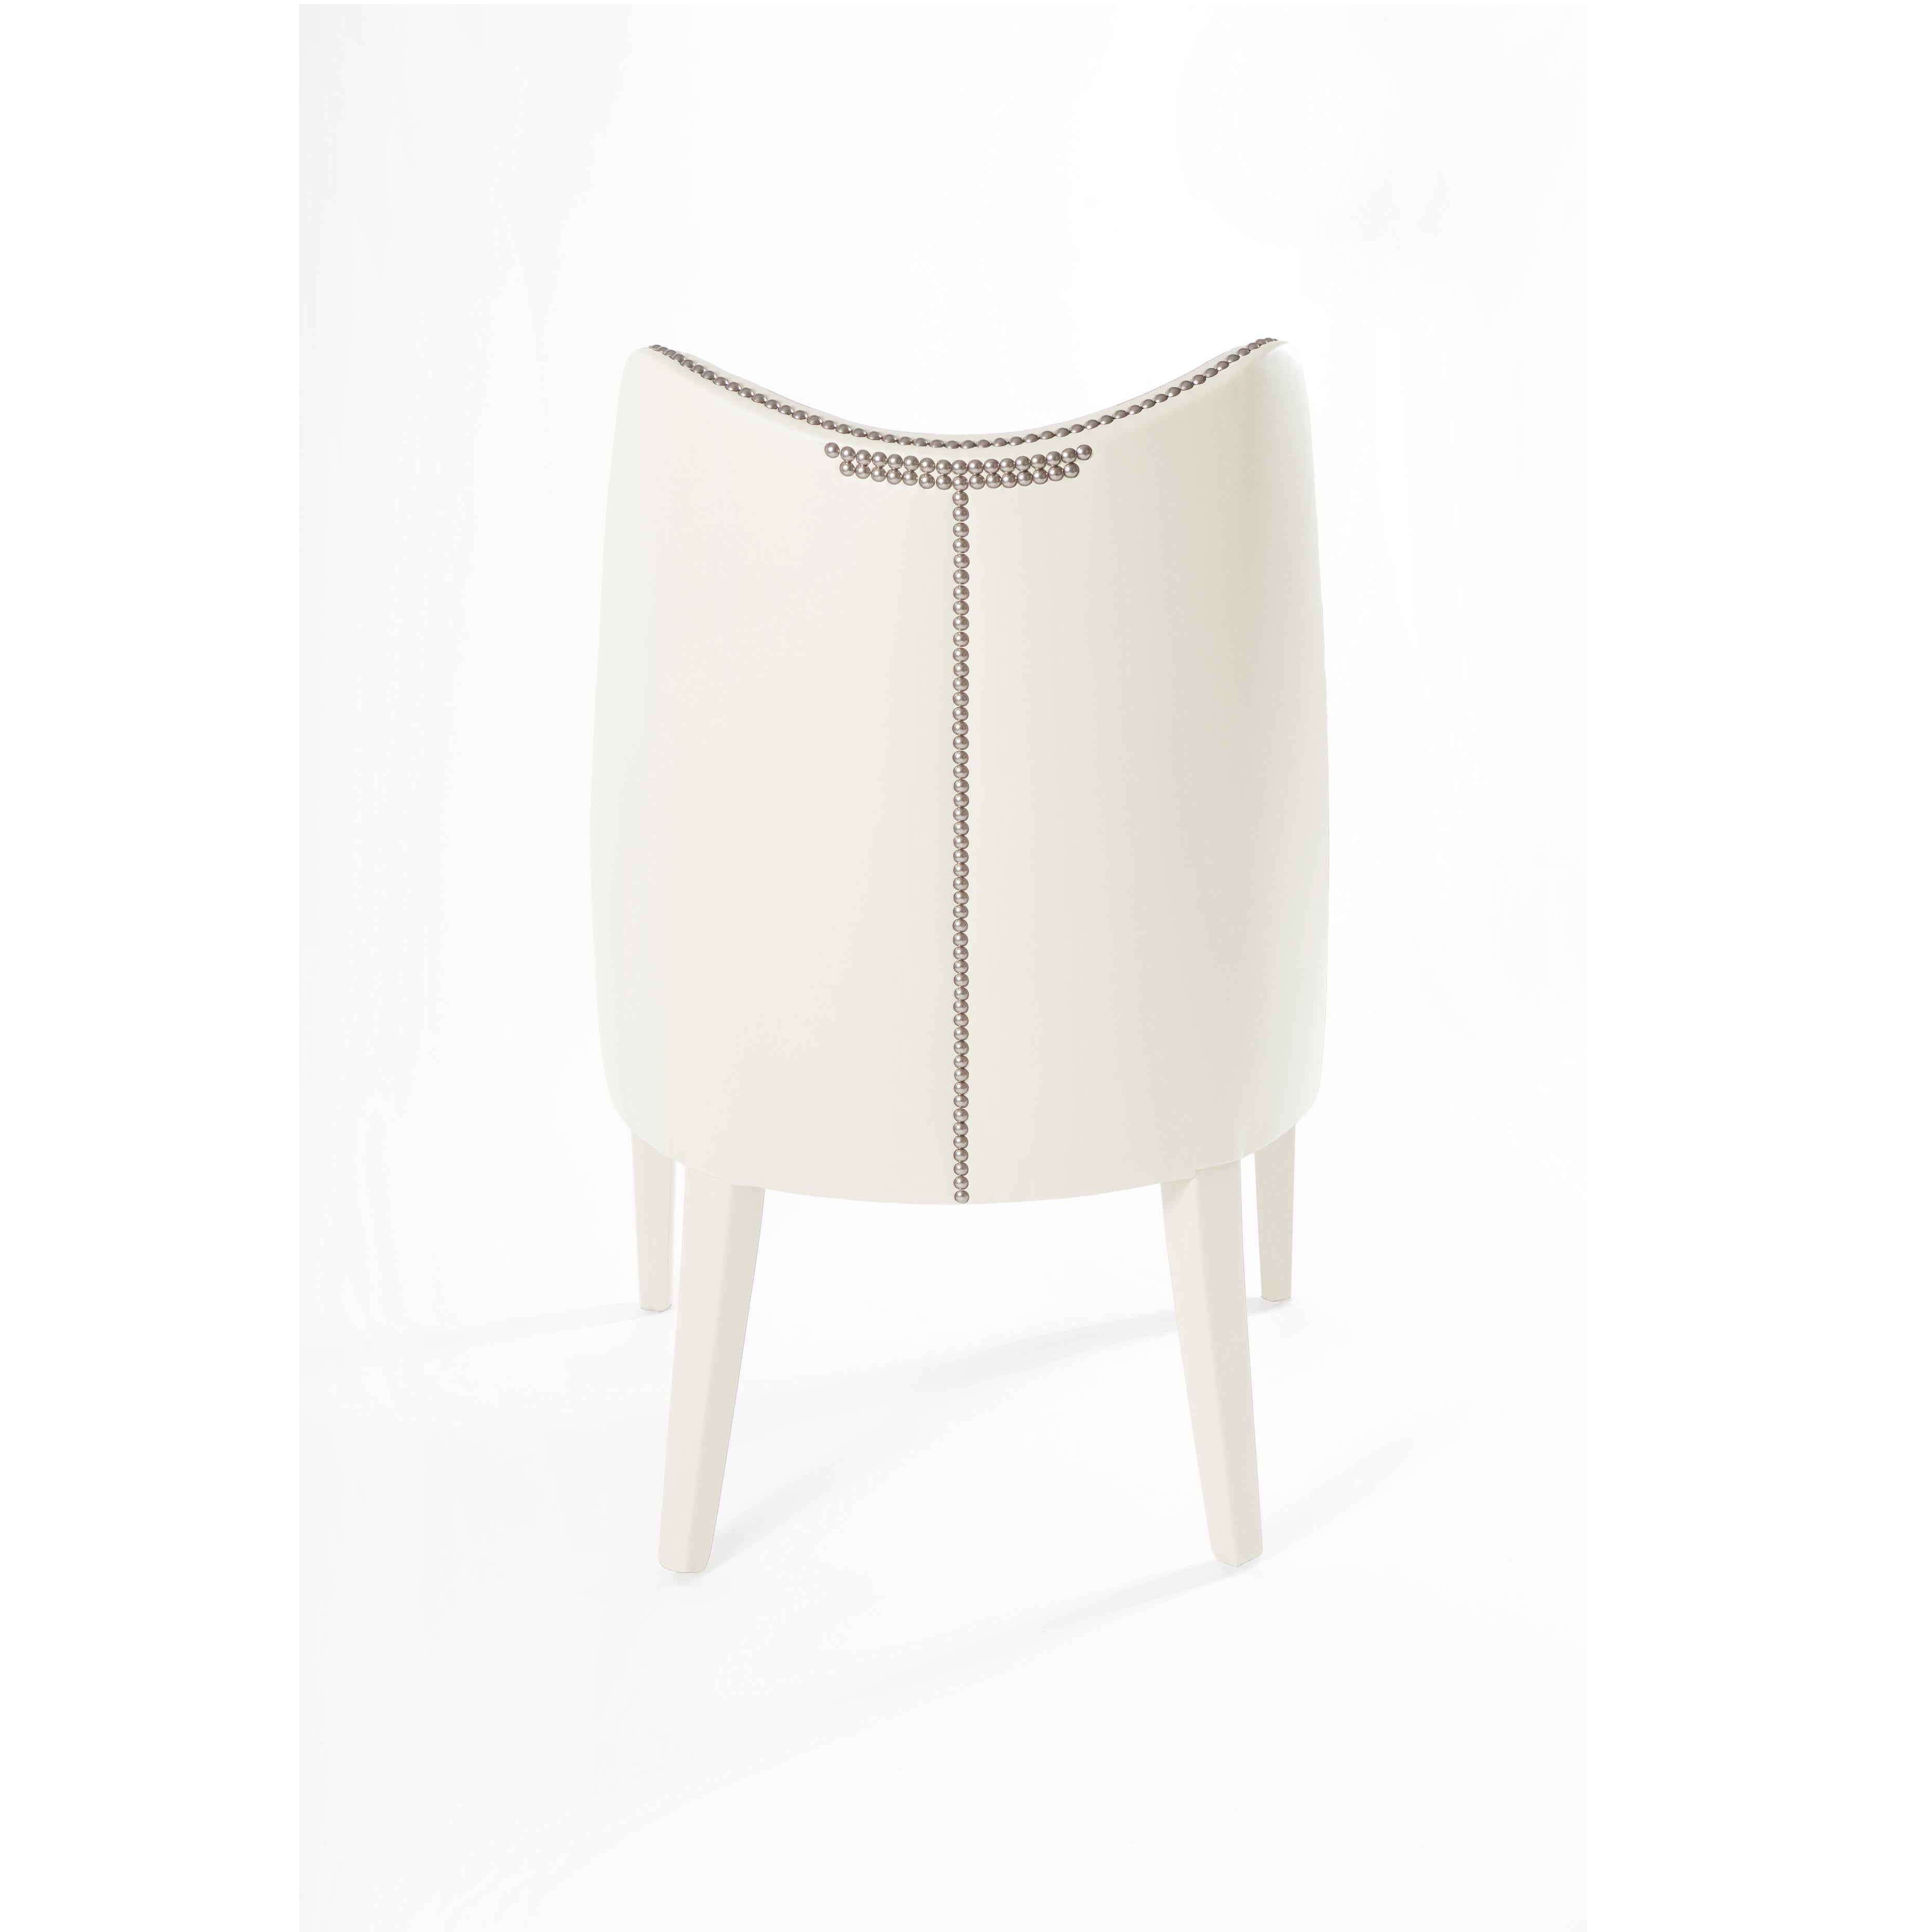 Contemporary Velvet Dining Chair Offered With Nails On The Curve & Back (Samt) im Angebot